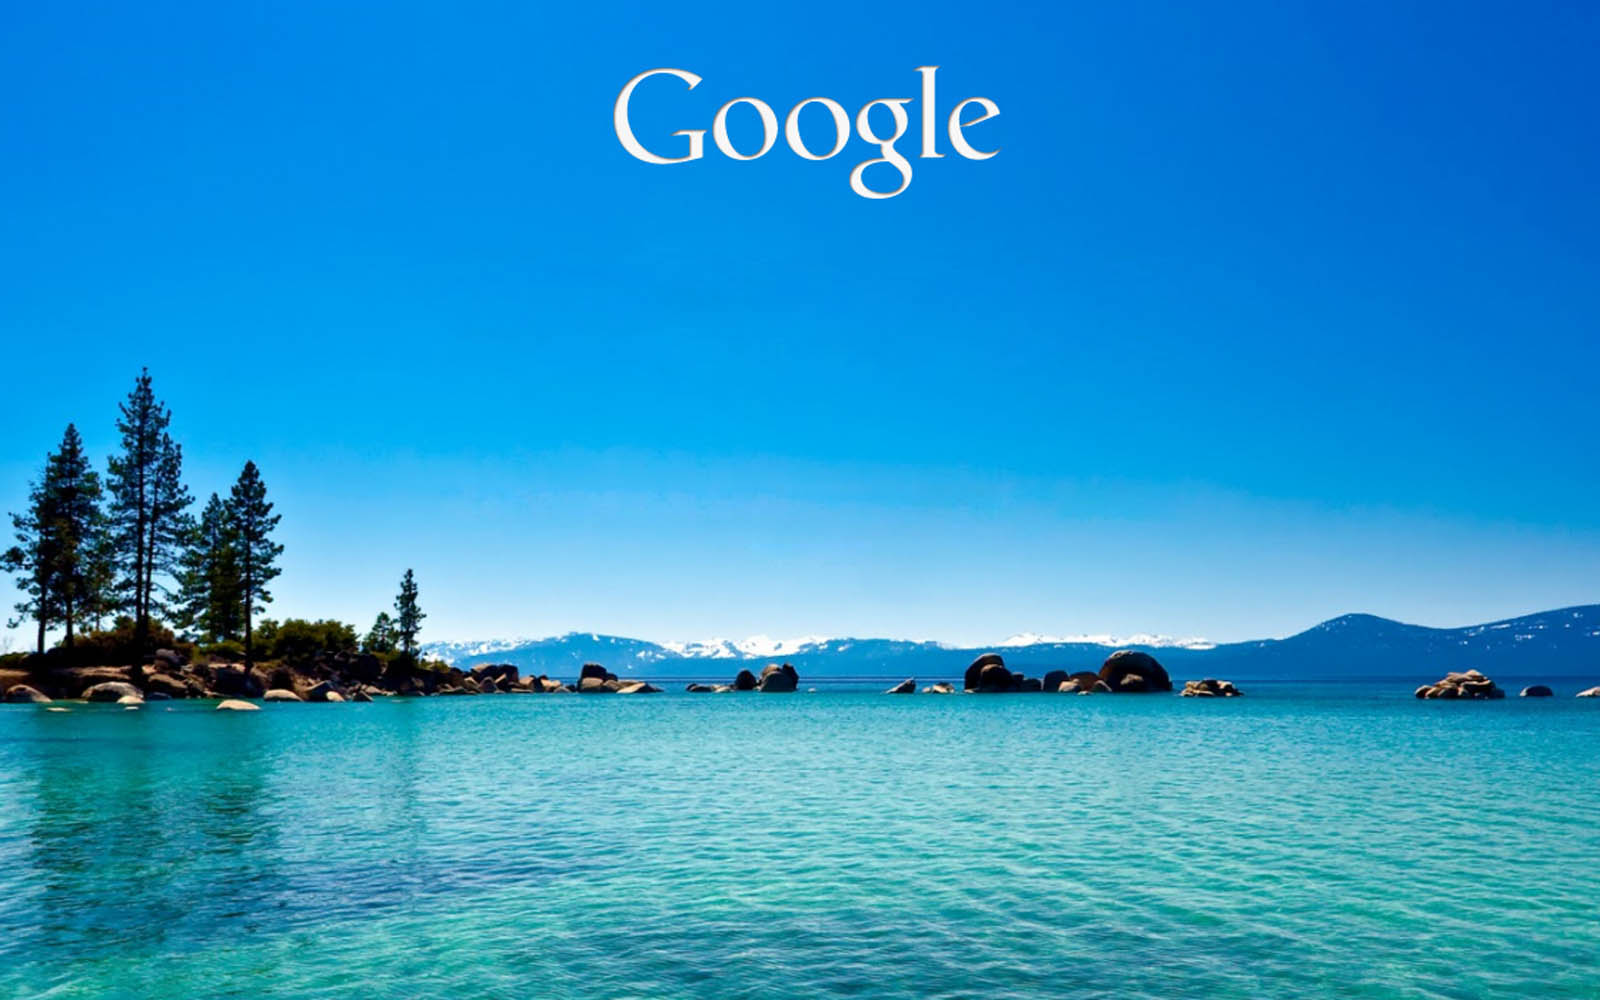  Google Backgrounds Wallpapers Photos Pictures and Images for 1600x1000